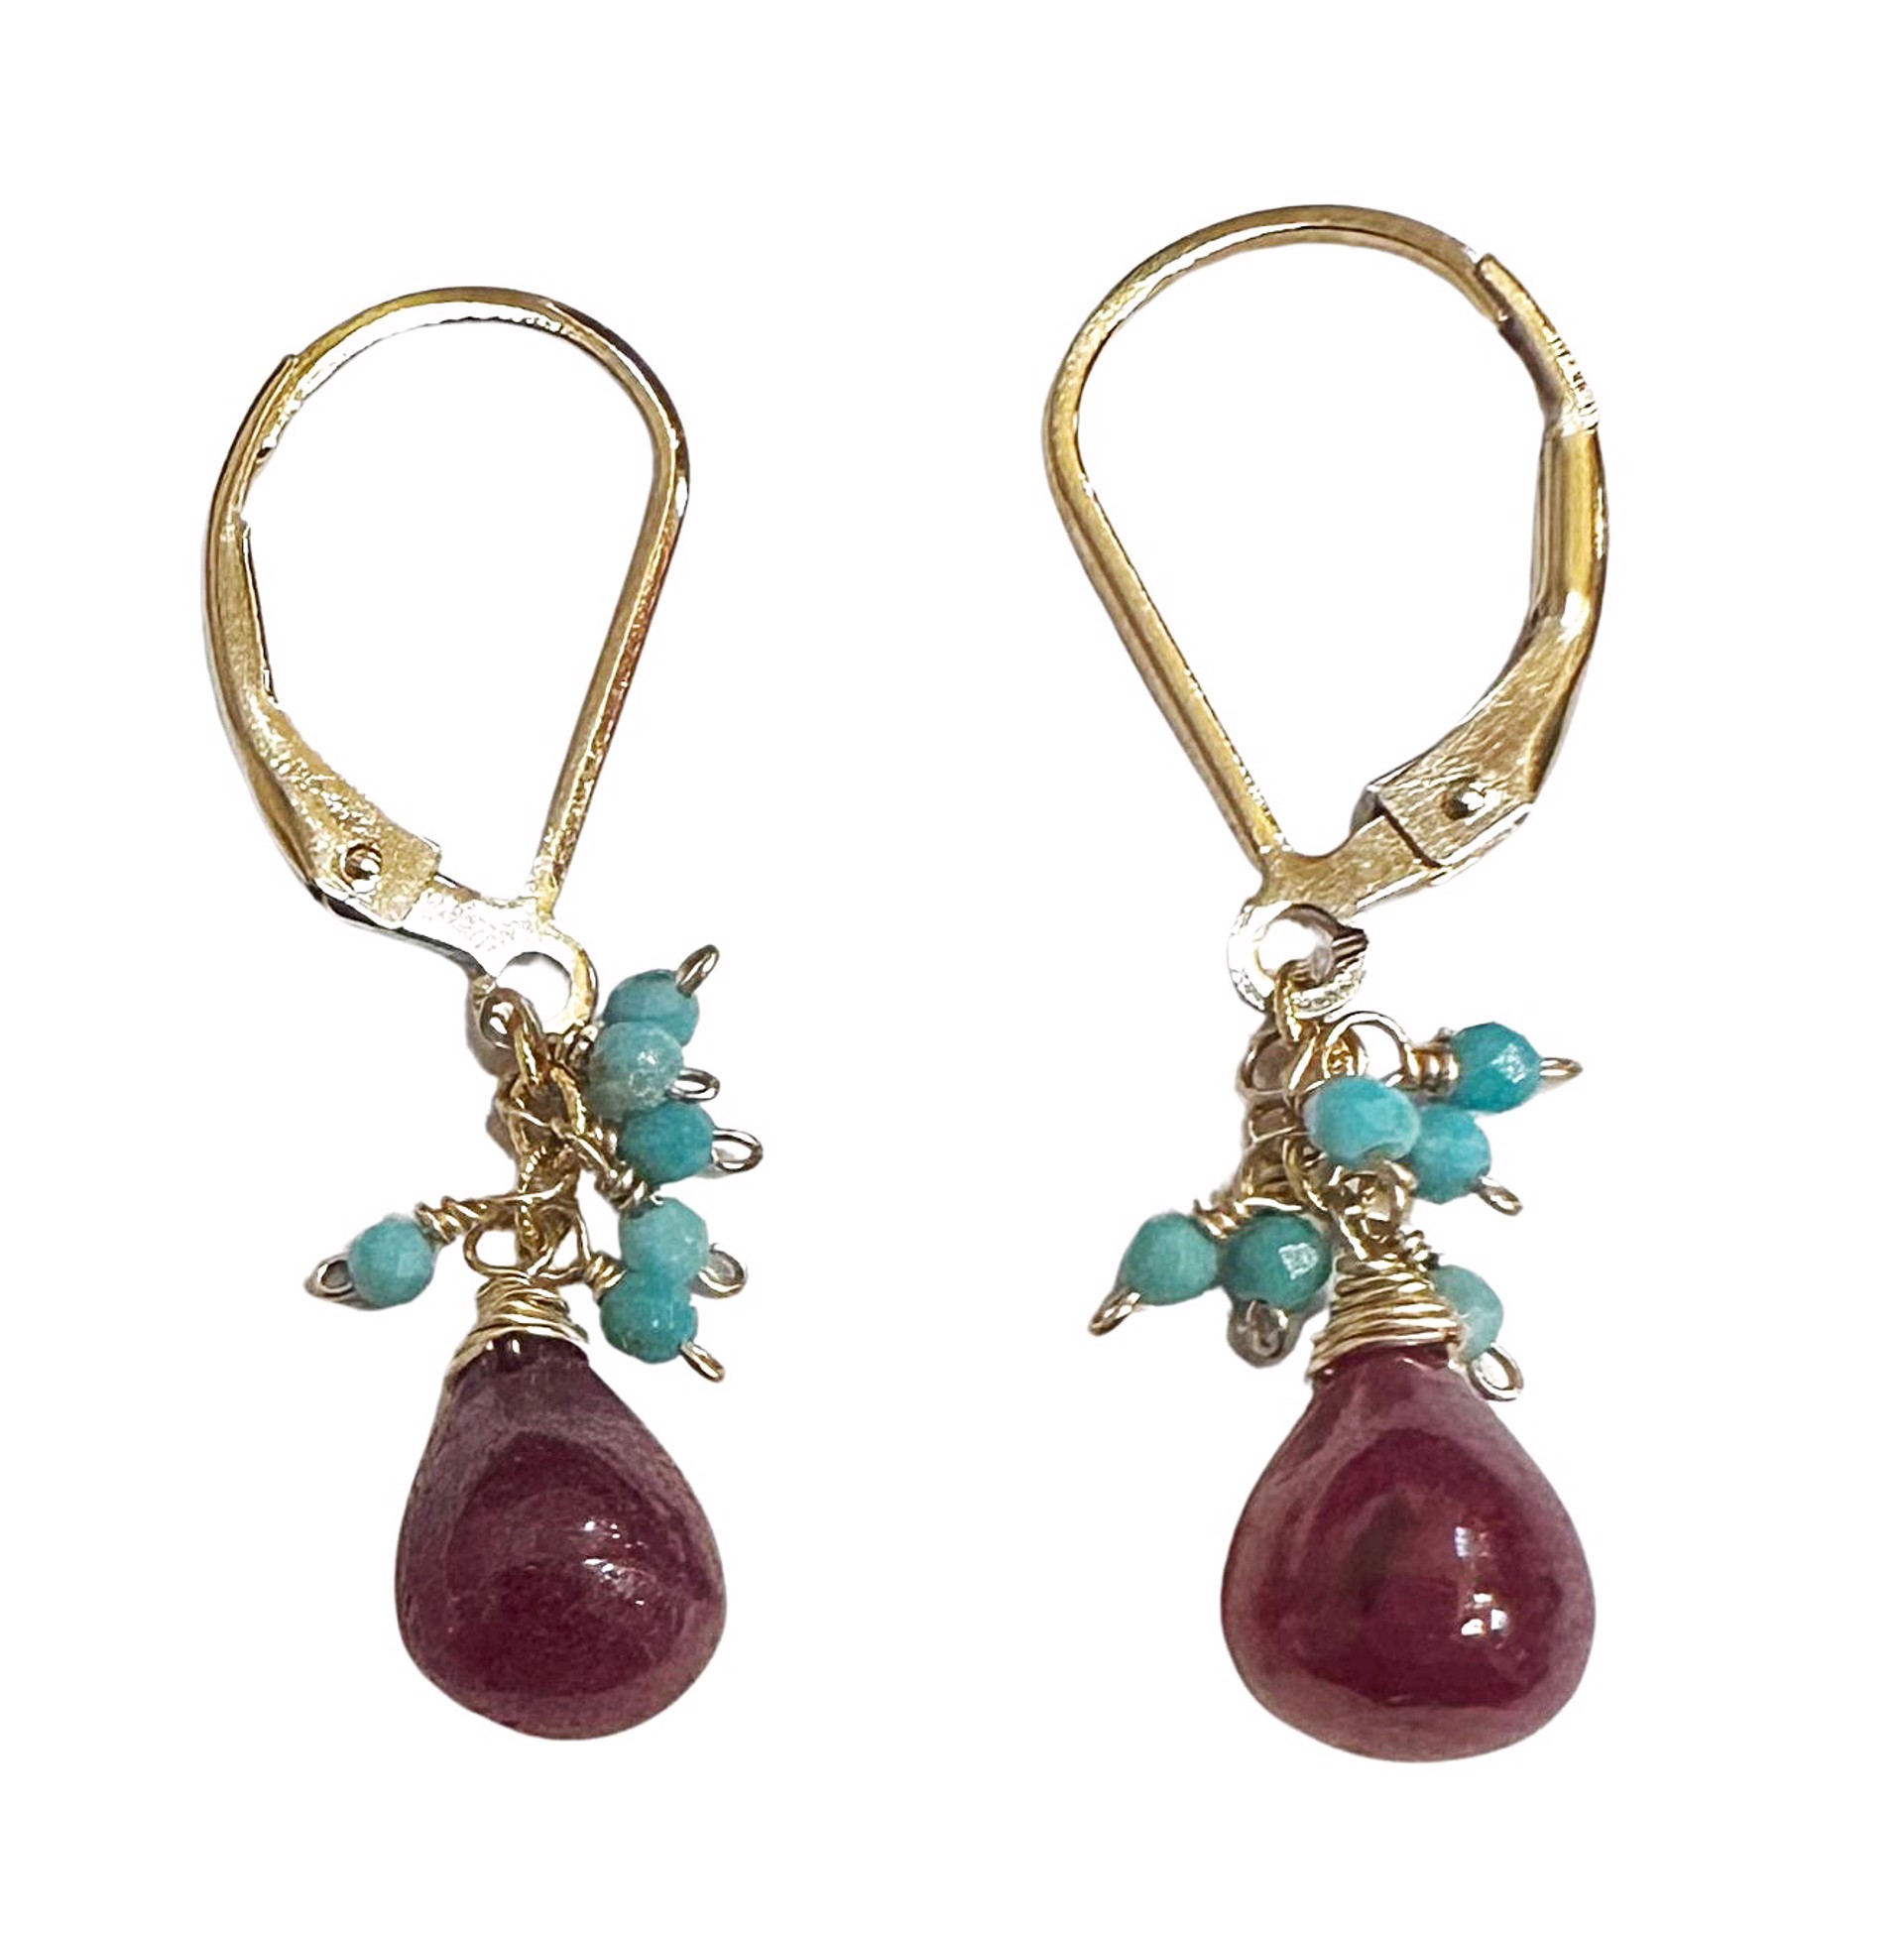 Earrings - Turquoise and Ruby with 14K Gold by Julia Balestracci